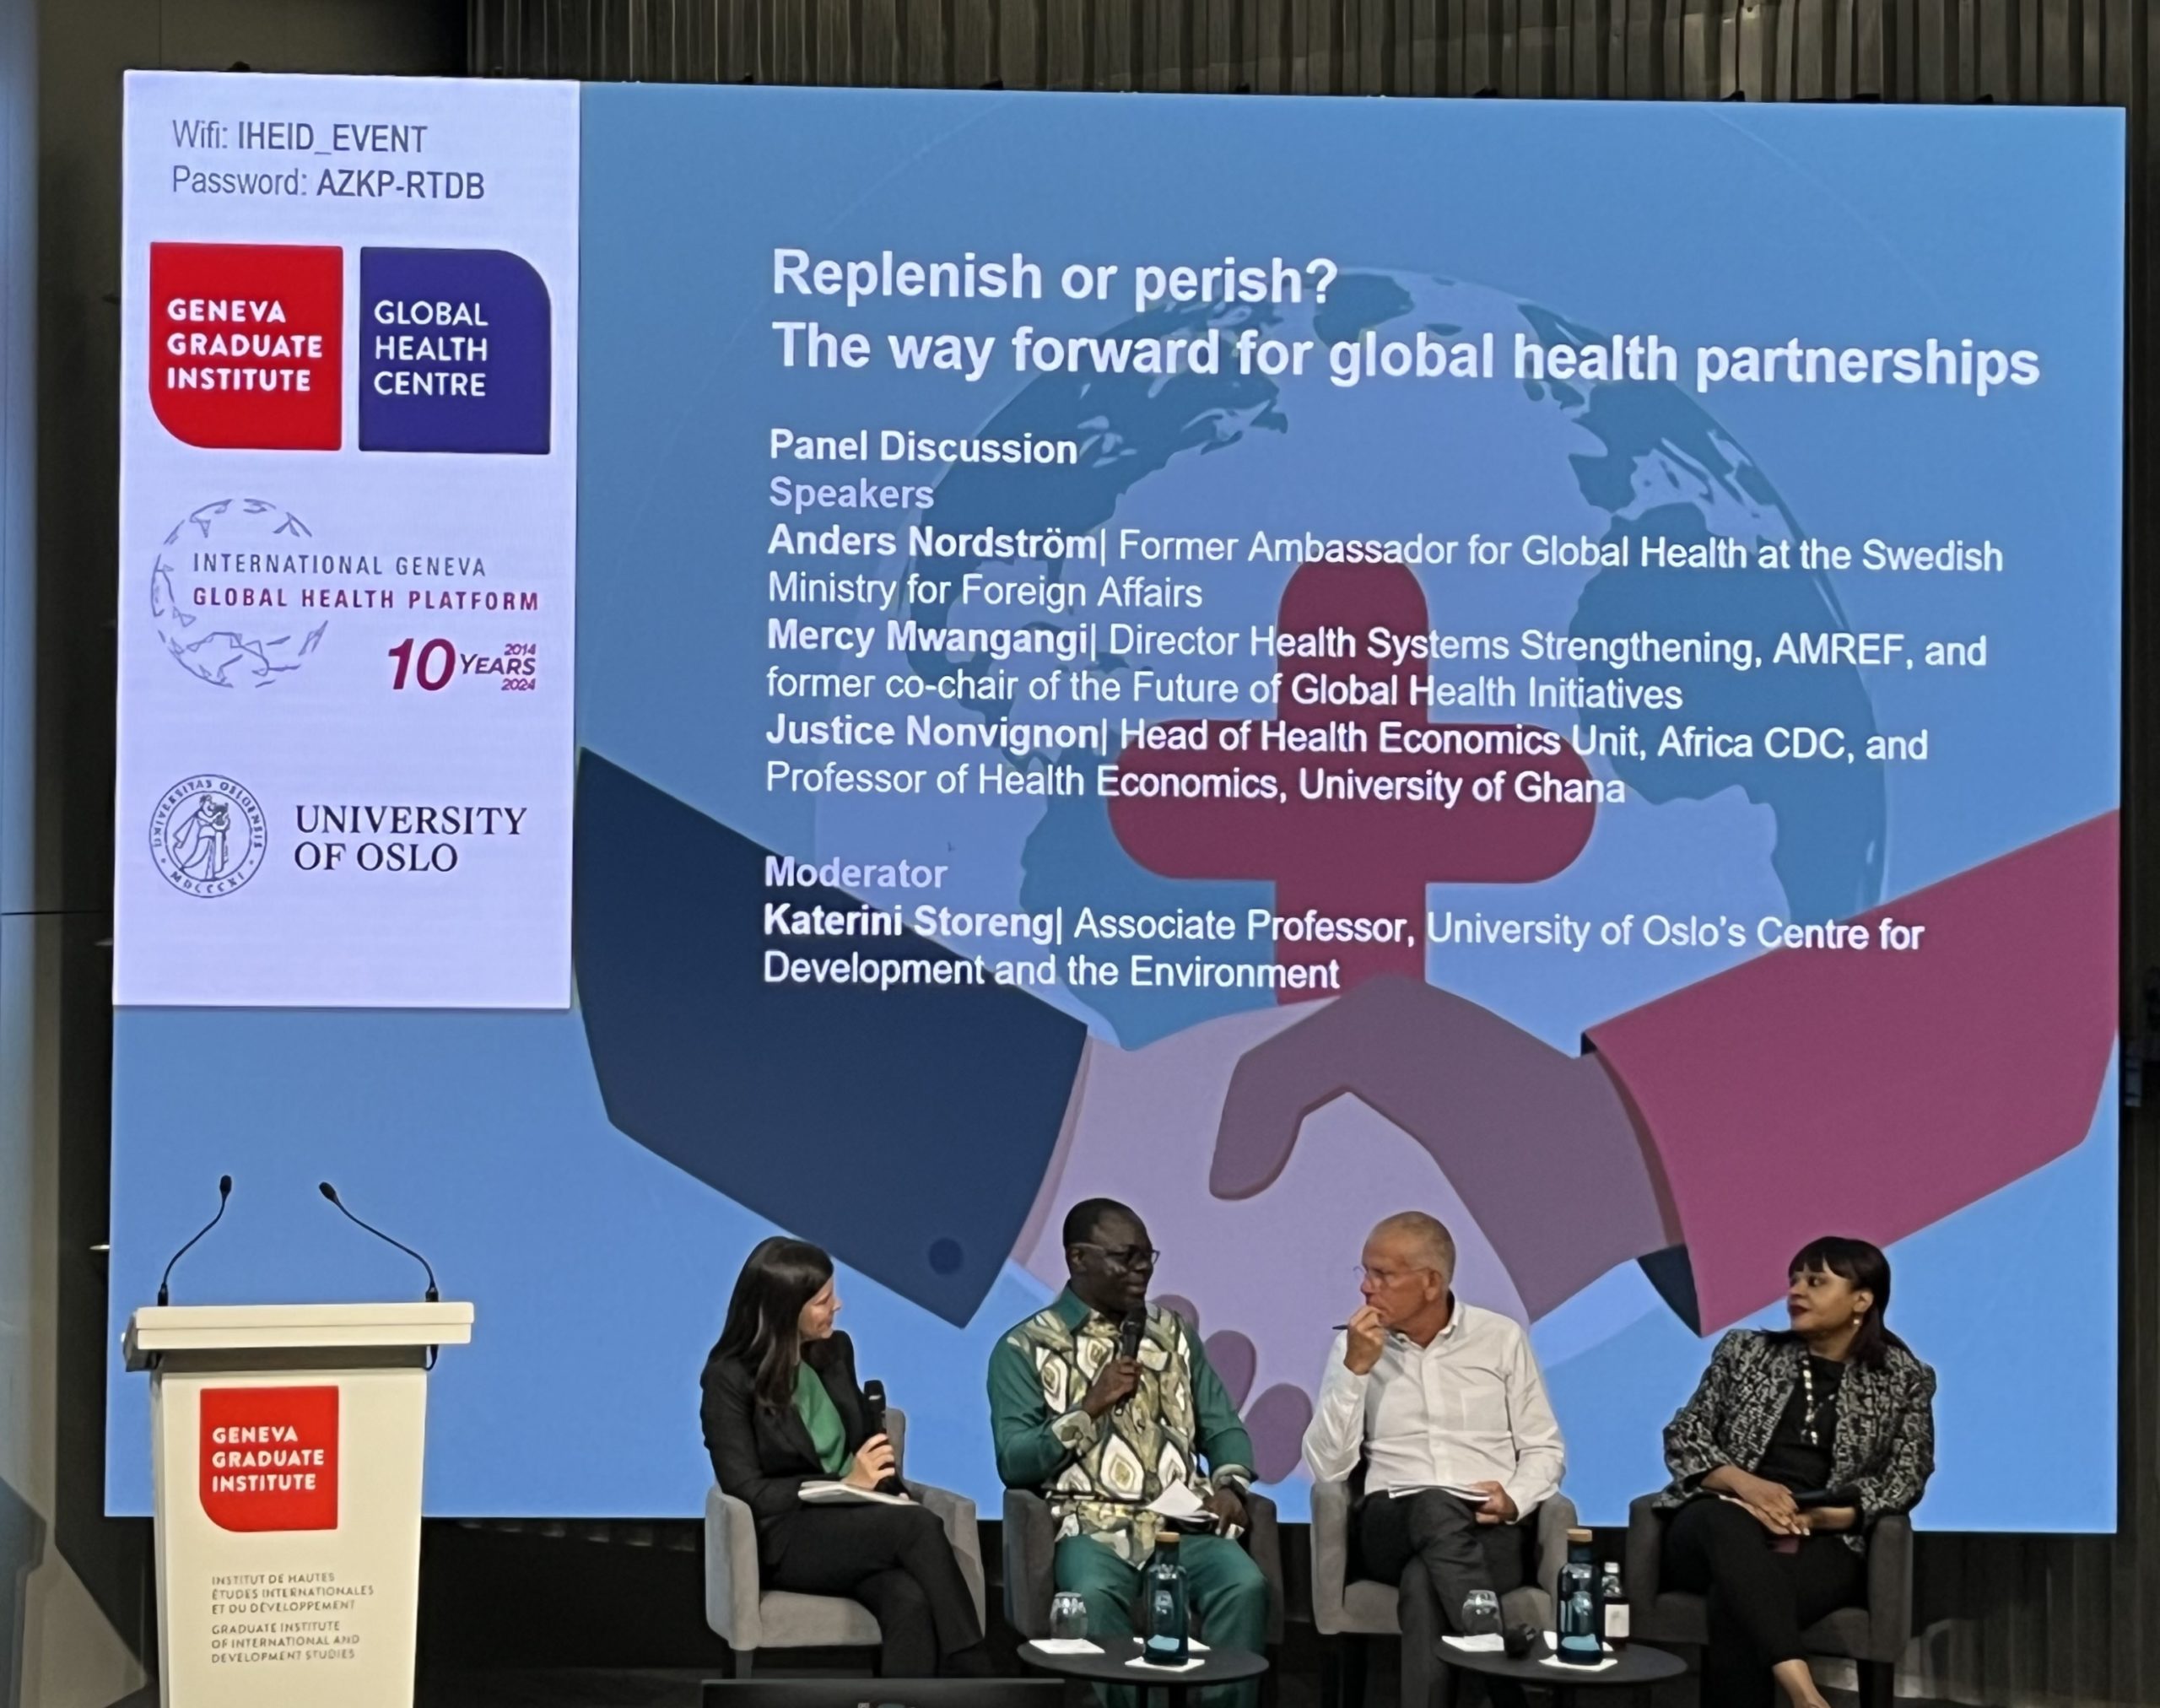 Panelists discuss the future of global health initiatives